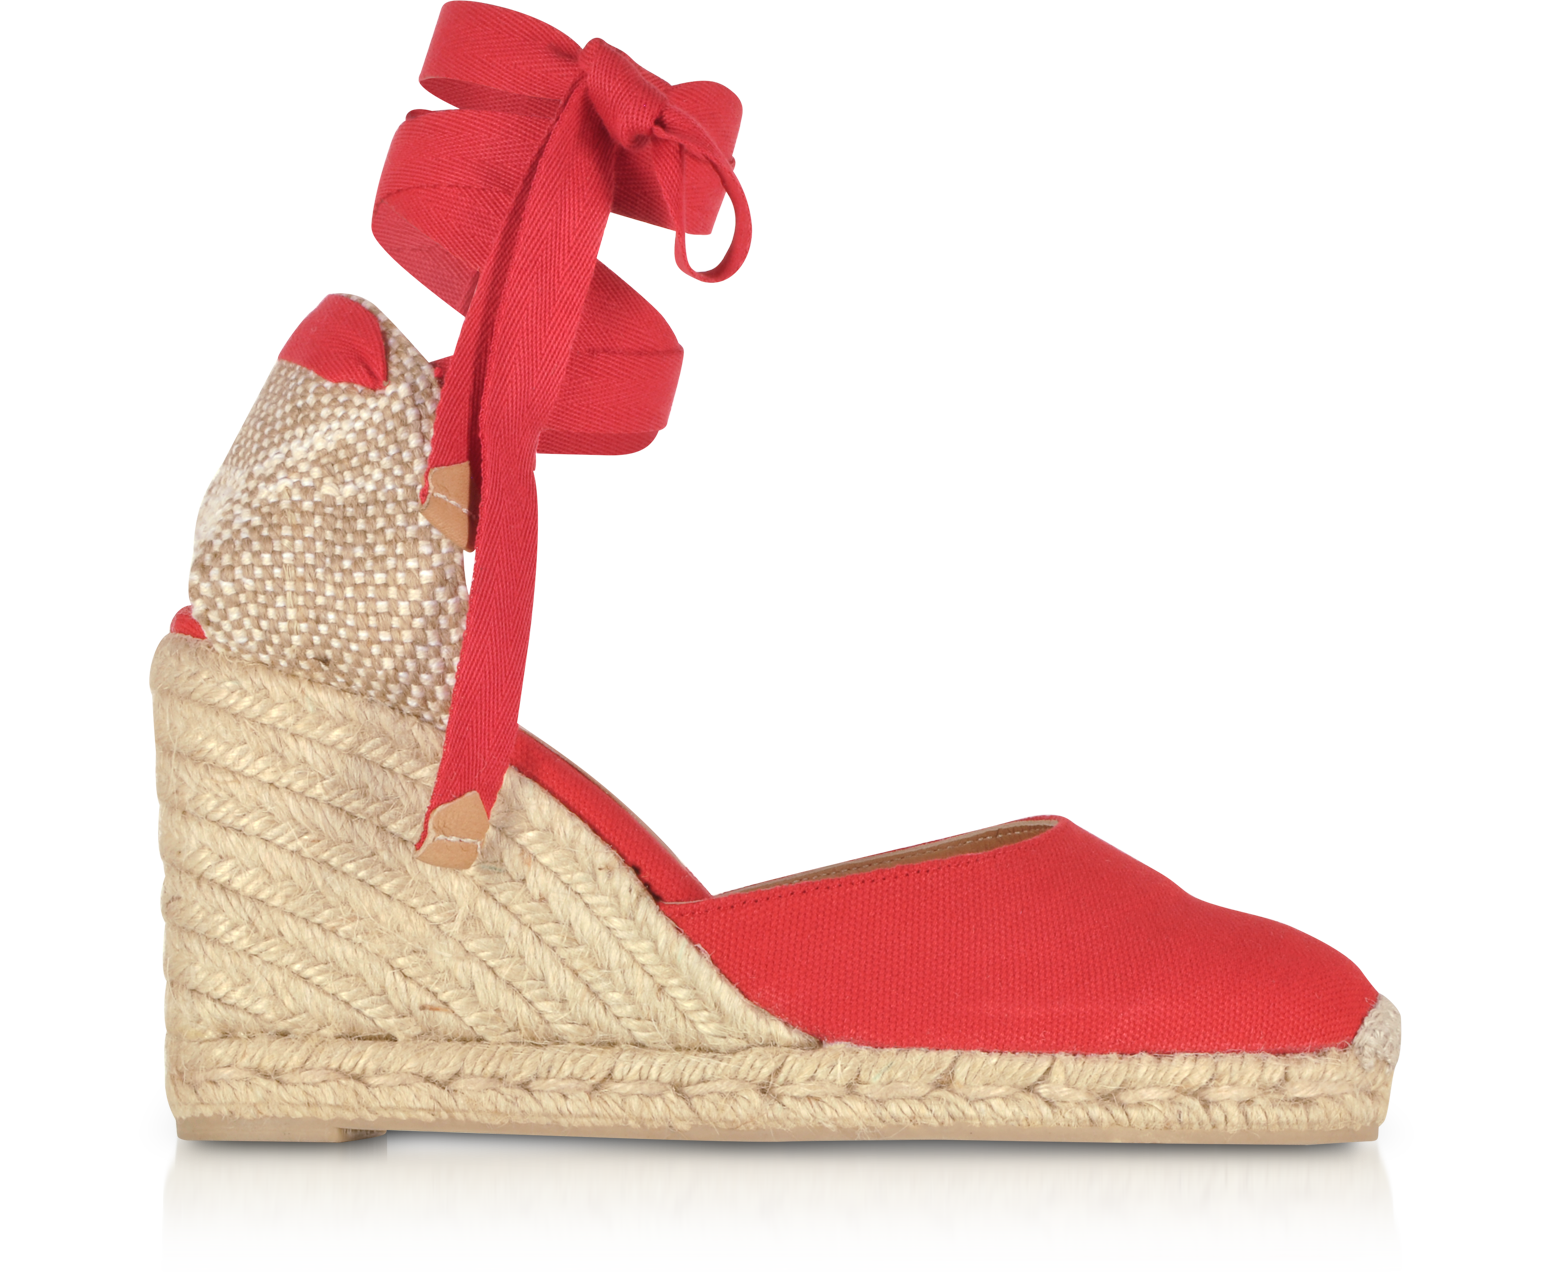 Castaner Carina Ruby Red Canvas Wedge Espadrilles 6 WOMENS US | 4 36 EU at FORZIERI